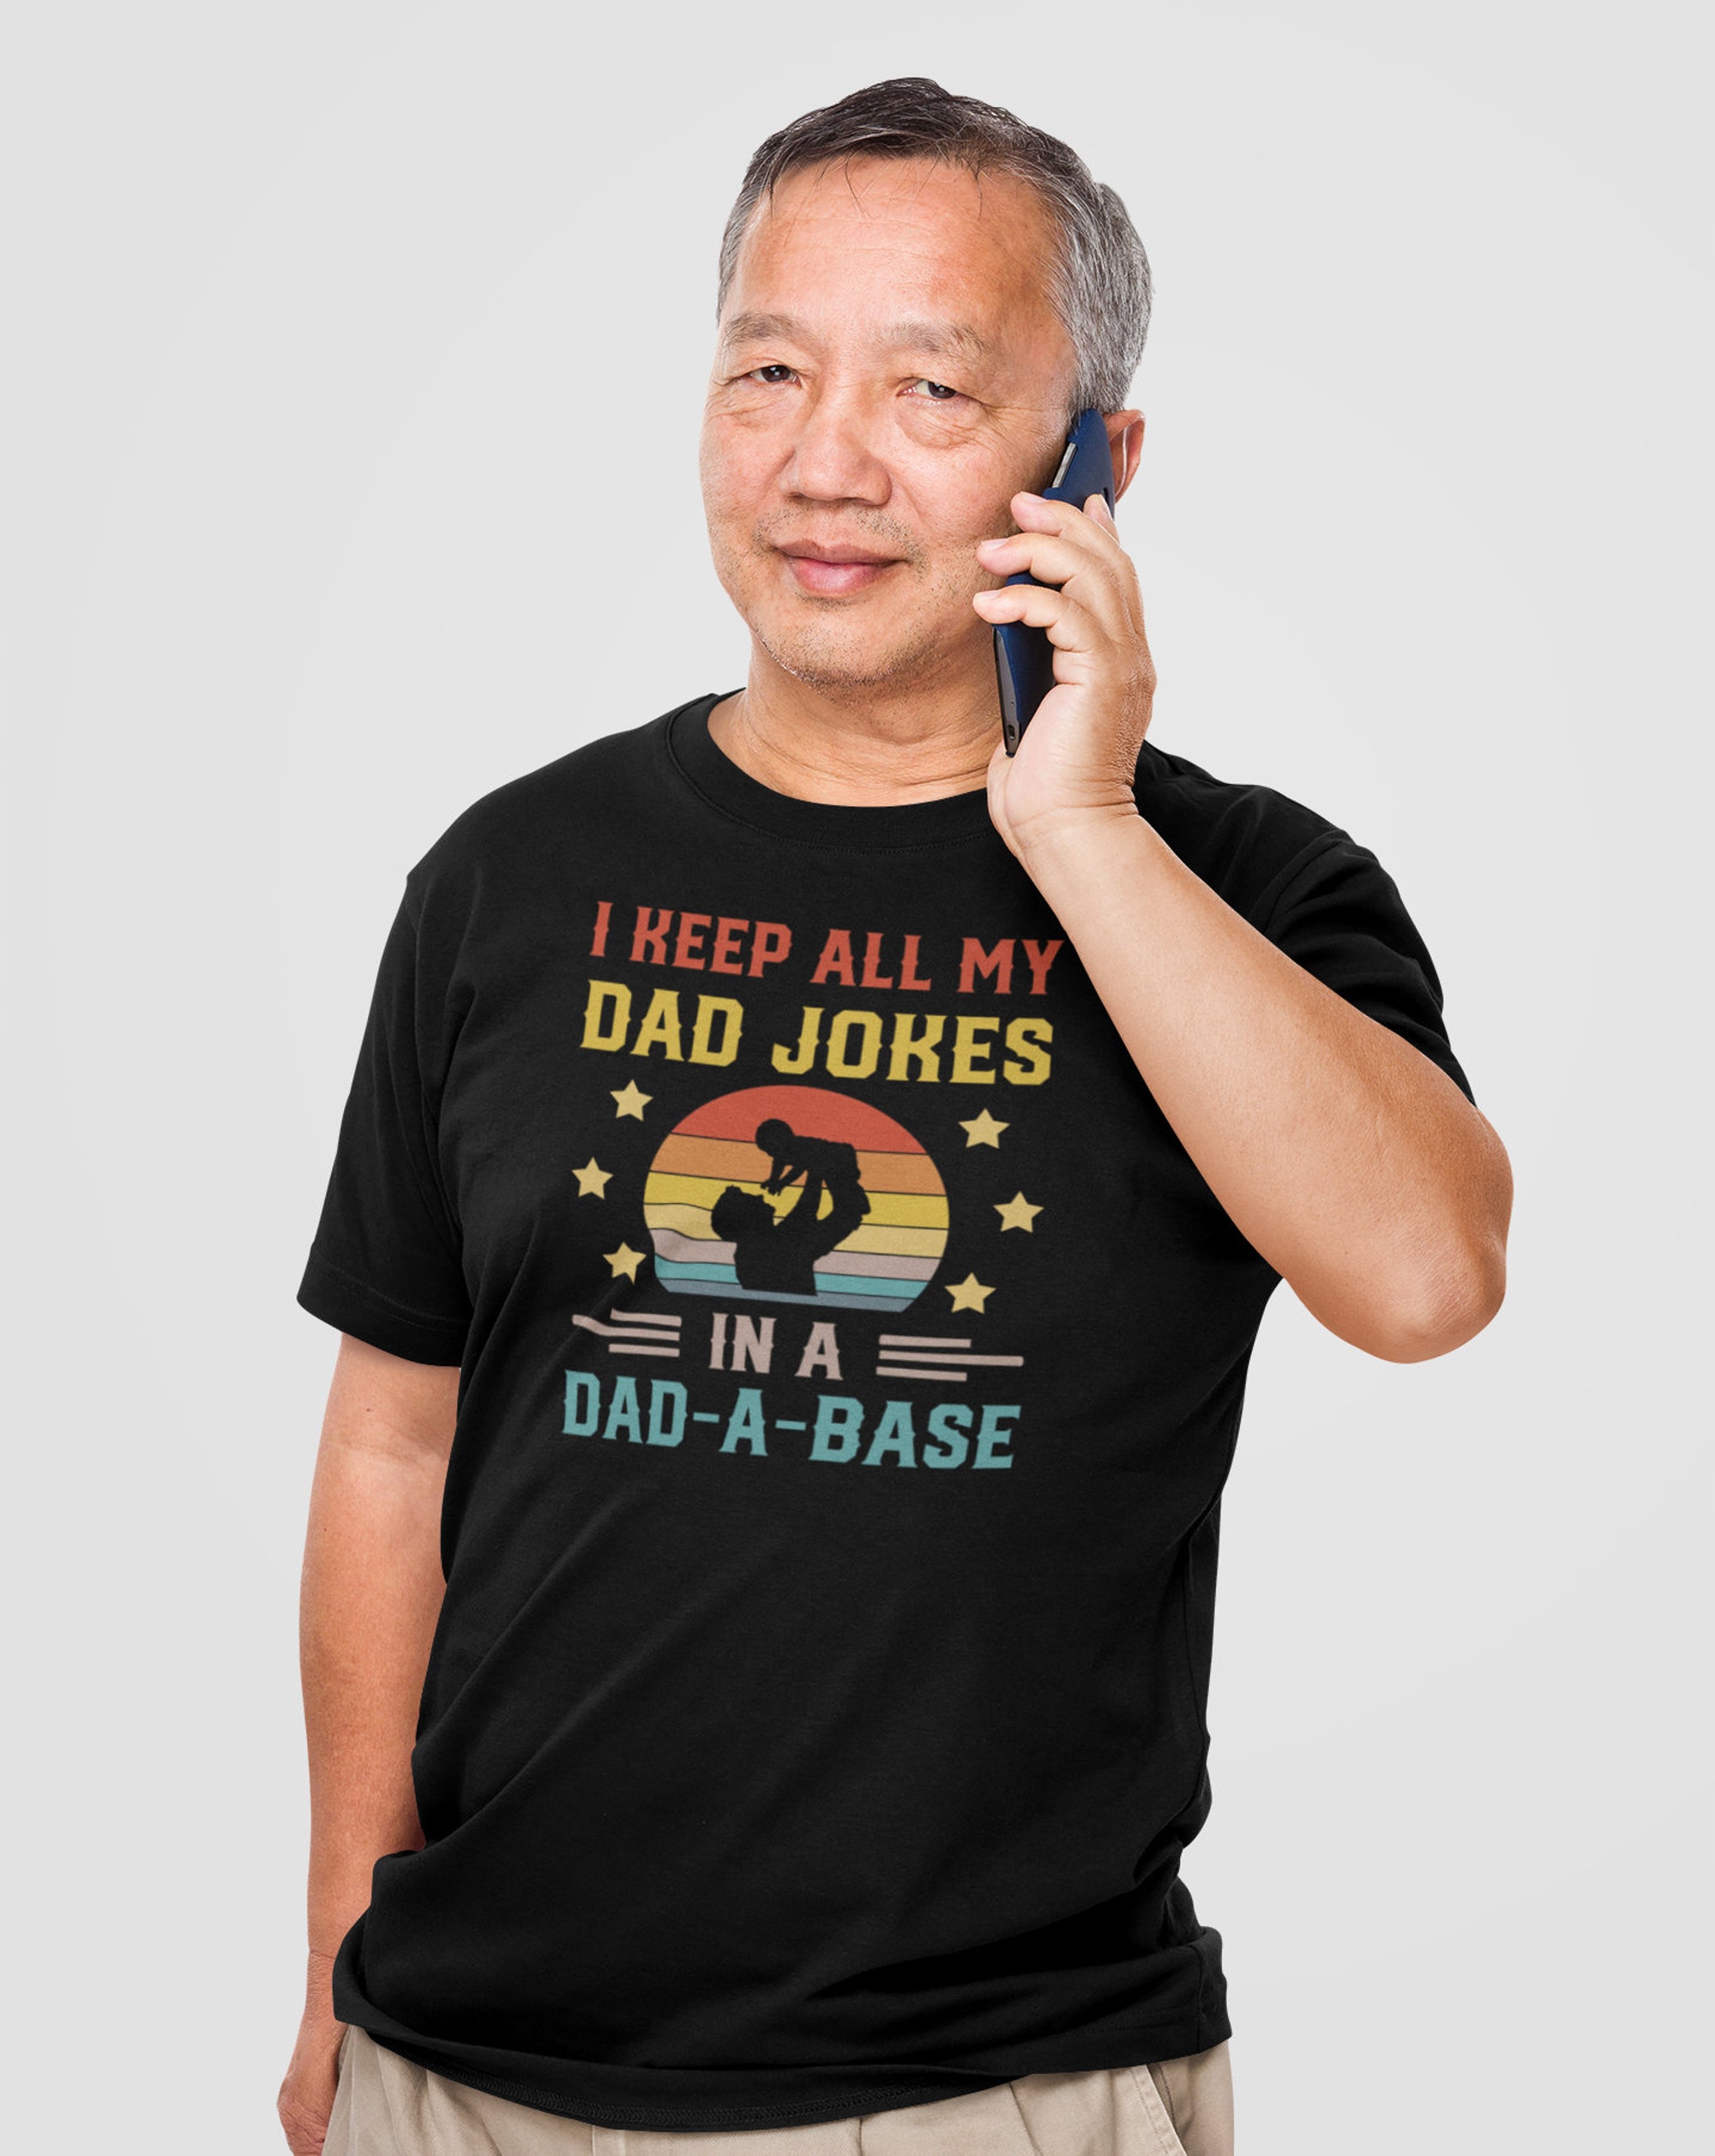 Discover I Keep All My Dad Jokes in a Dad-a-Base Father's Day T-Shirt